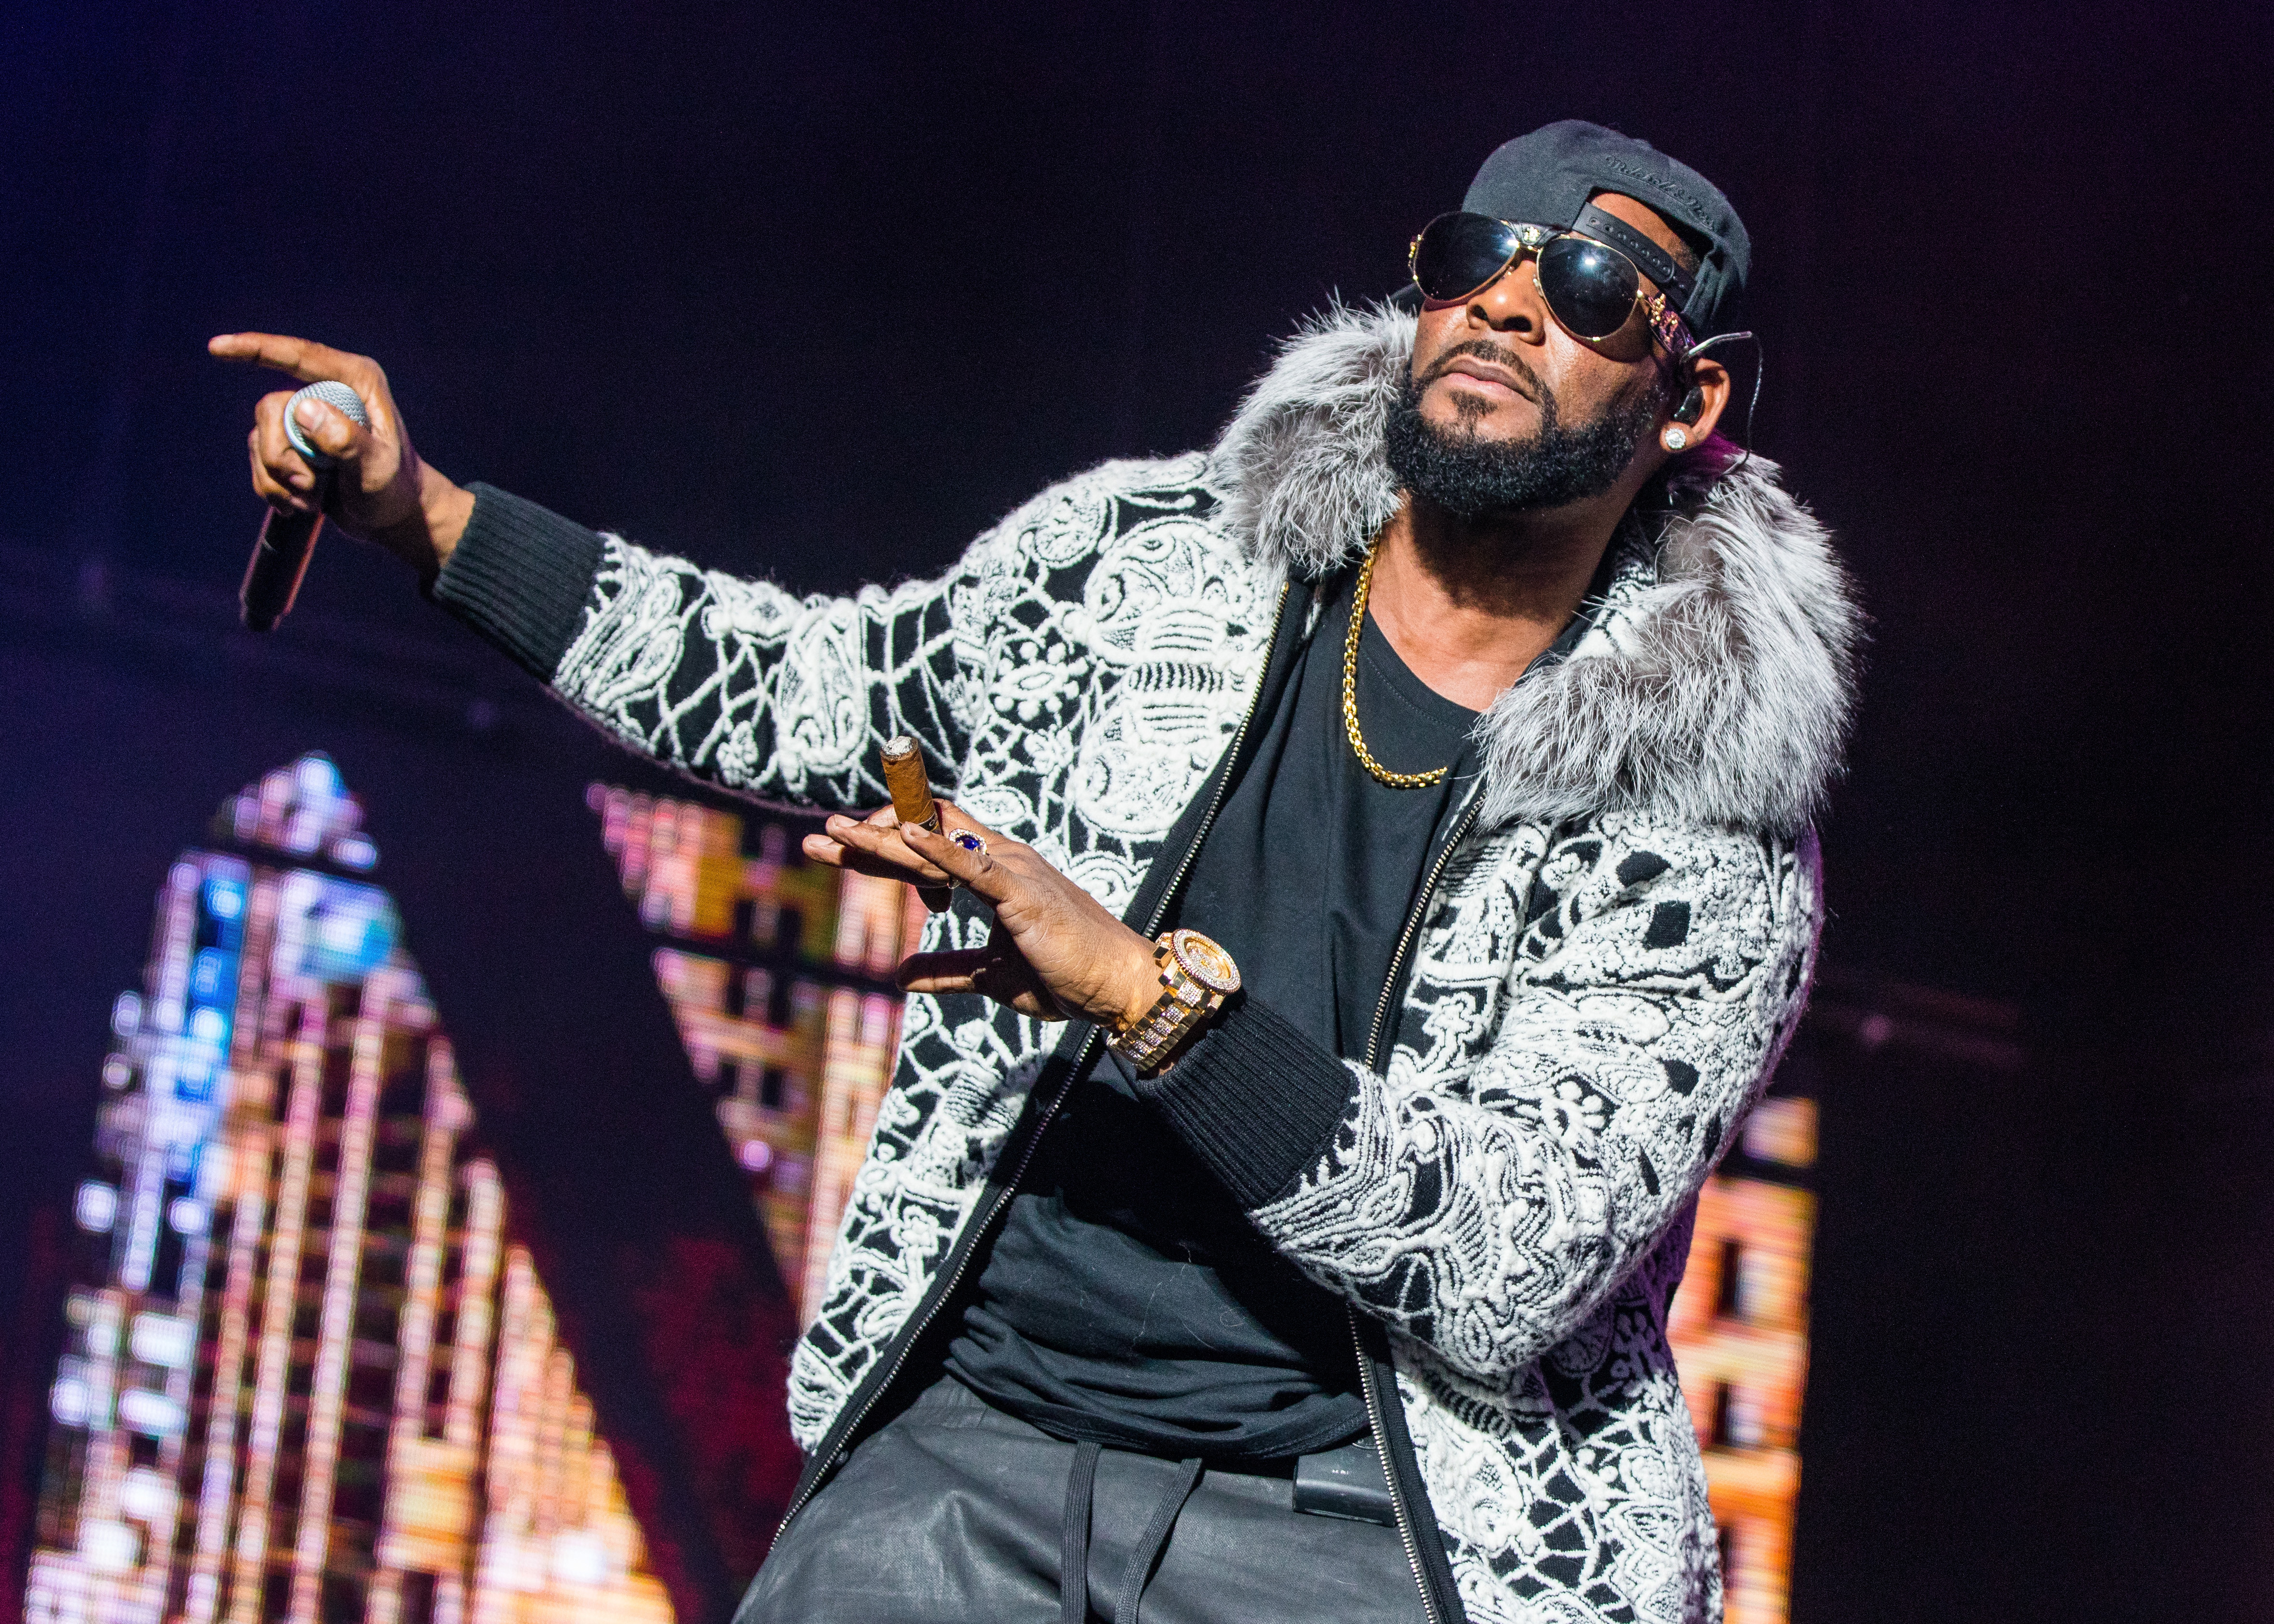 R. Kelly performs in Detroit, Mich. on Feb. 21, 2018. (Scott Legato&mdash;Getty Images)